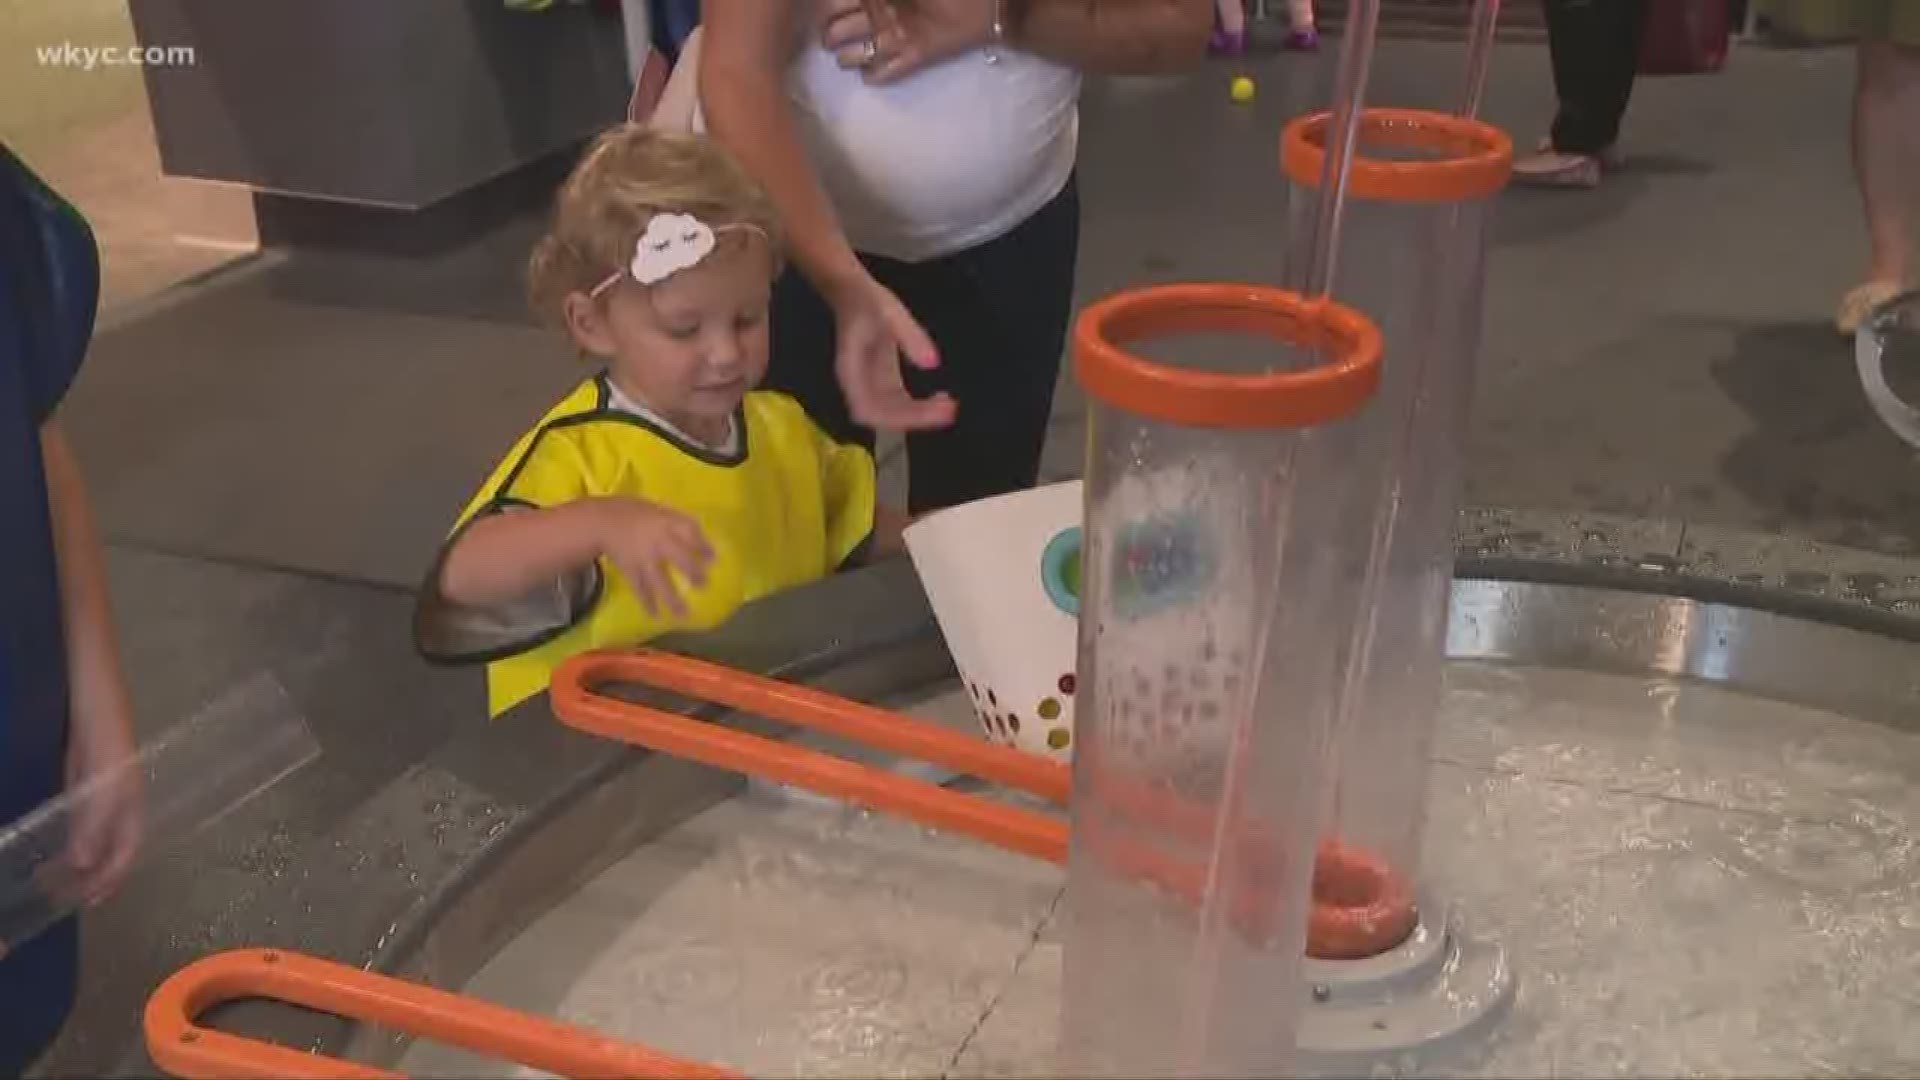 The Children’s Museum of Cleveland is helping kids learn by just letting them play in its interactive exhibits.